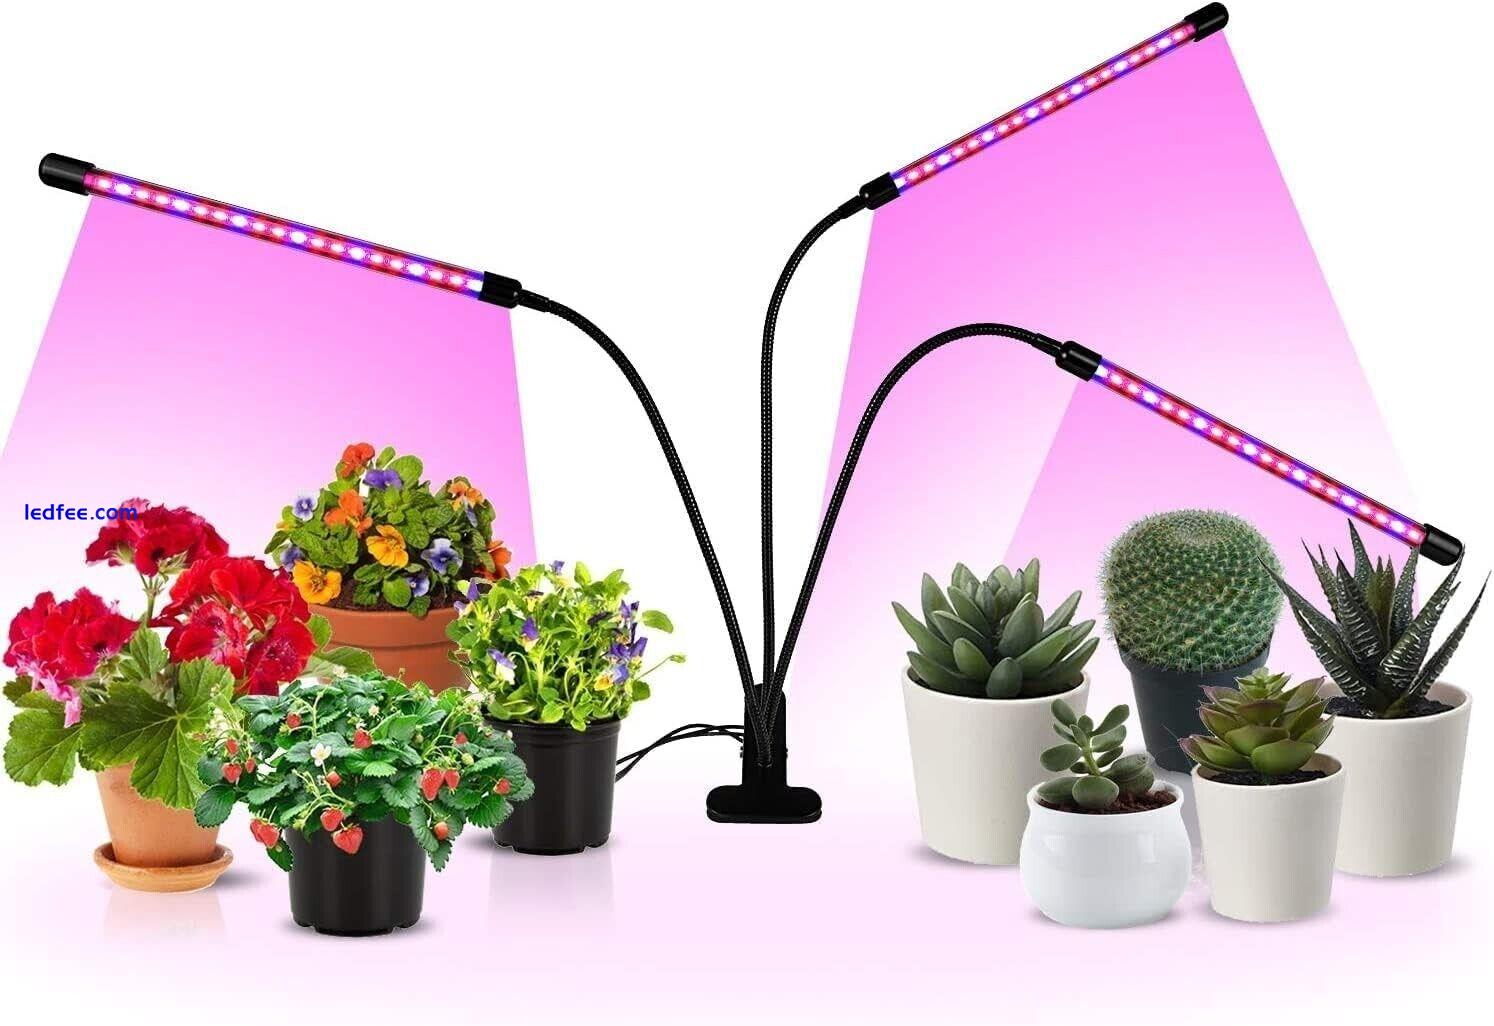 LED Grow Light Plant Growing Lamp Full Spectrum for Indoor Plants Hydroponics 4 